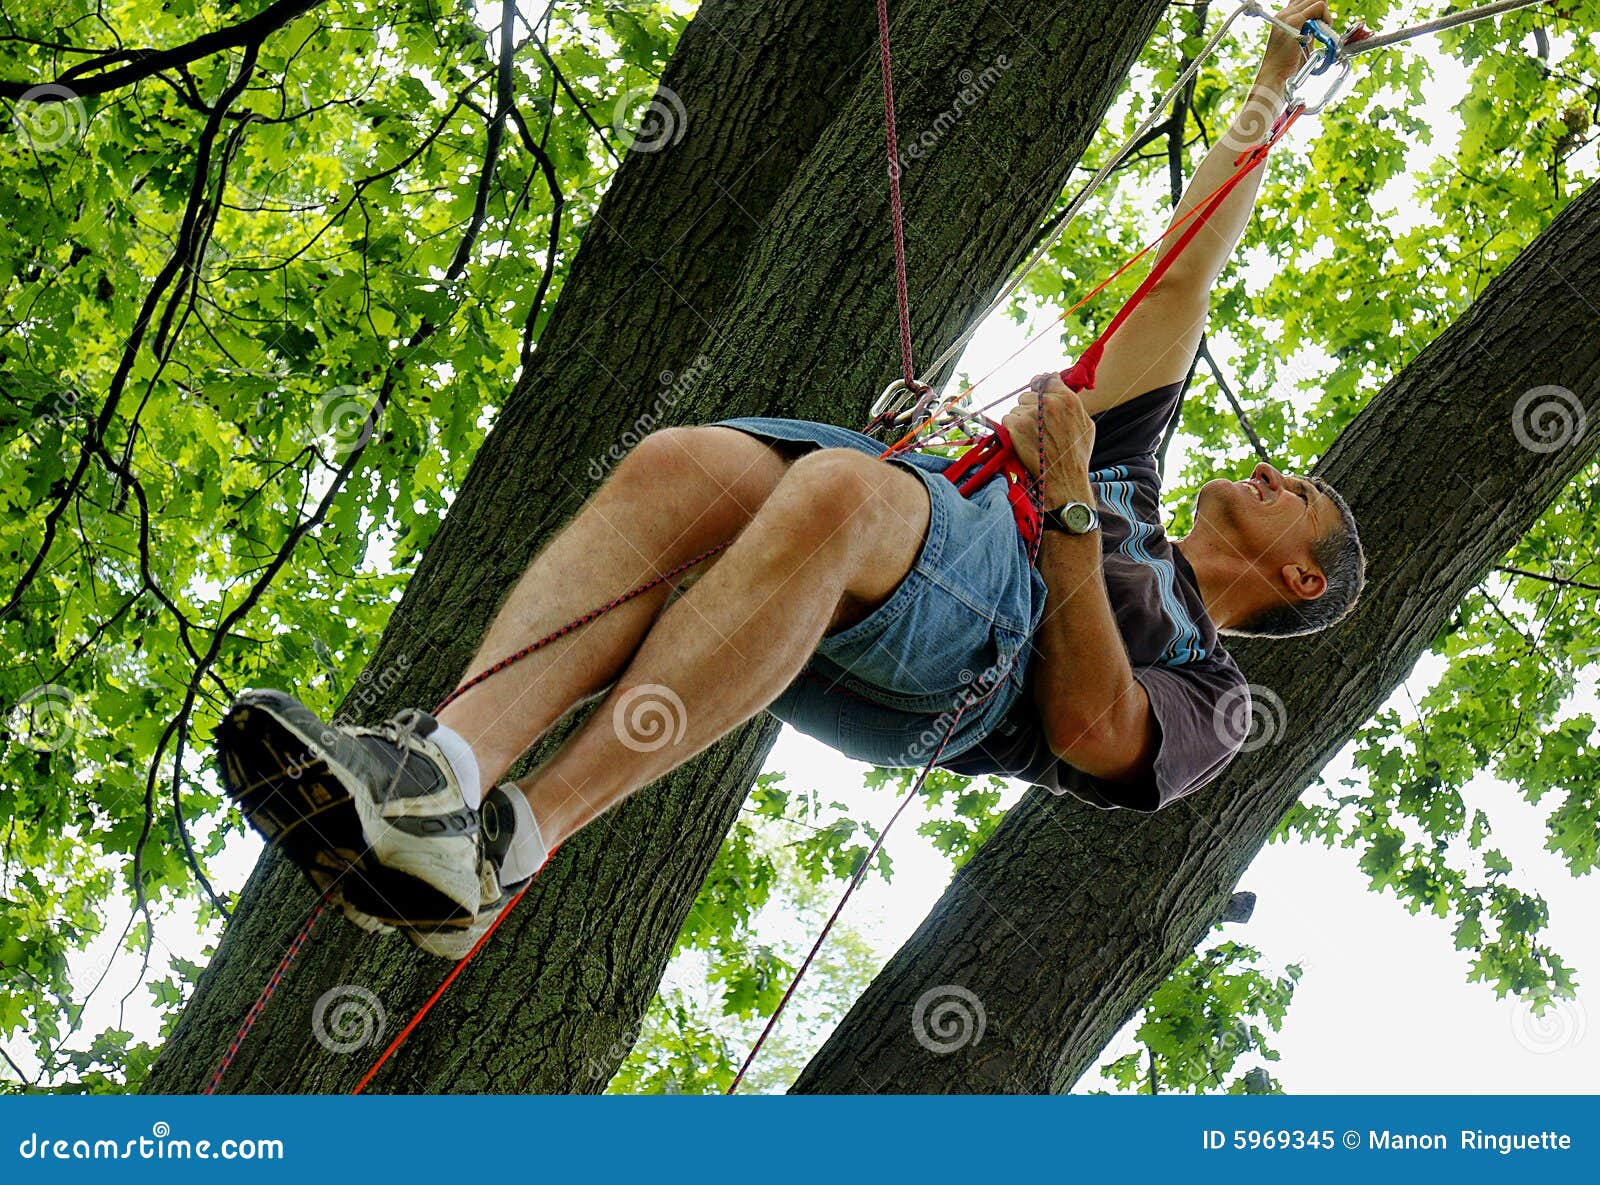 suspended from ropes in a tree